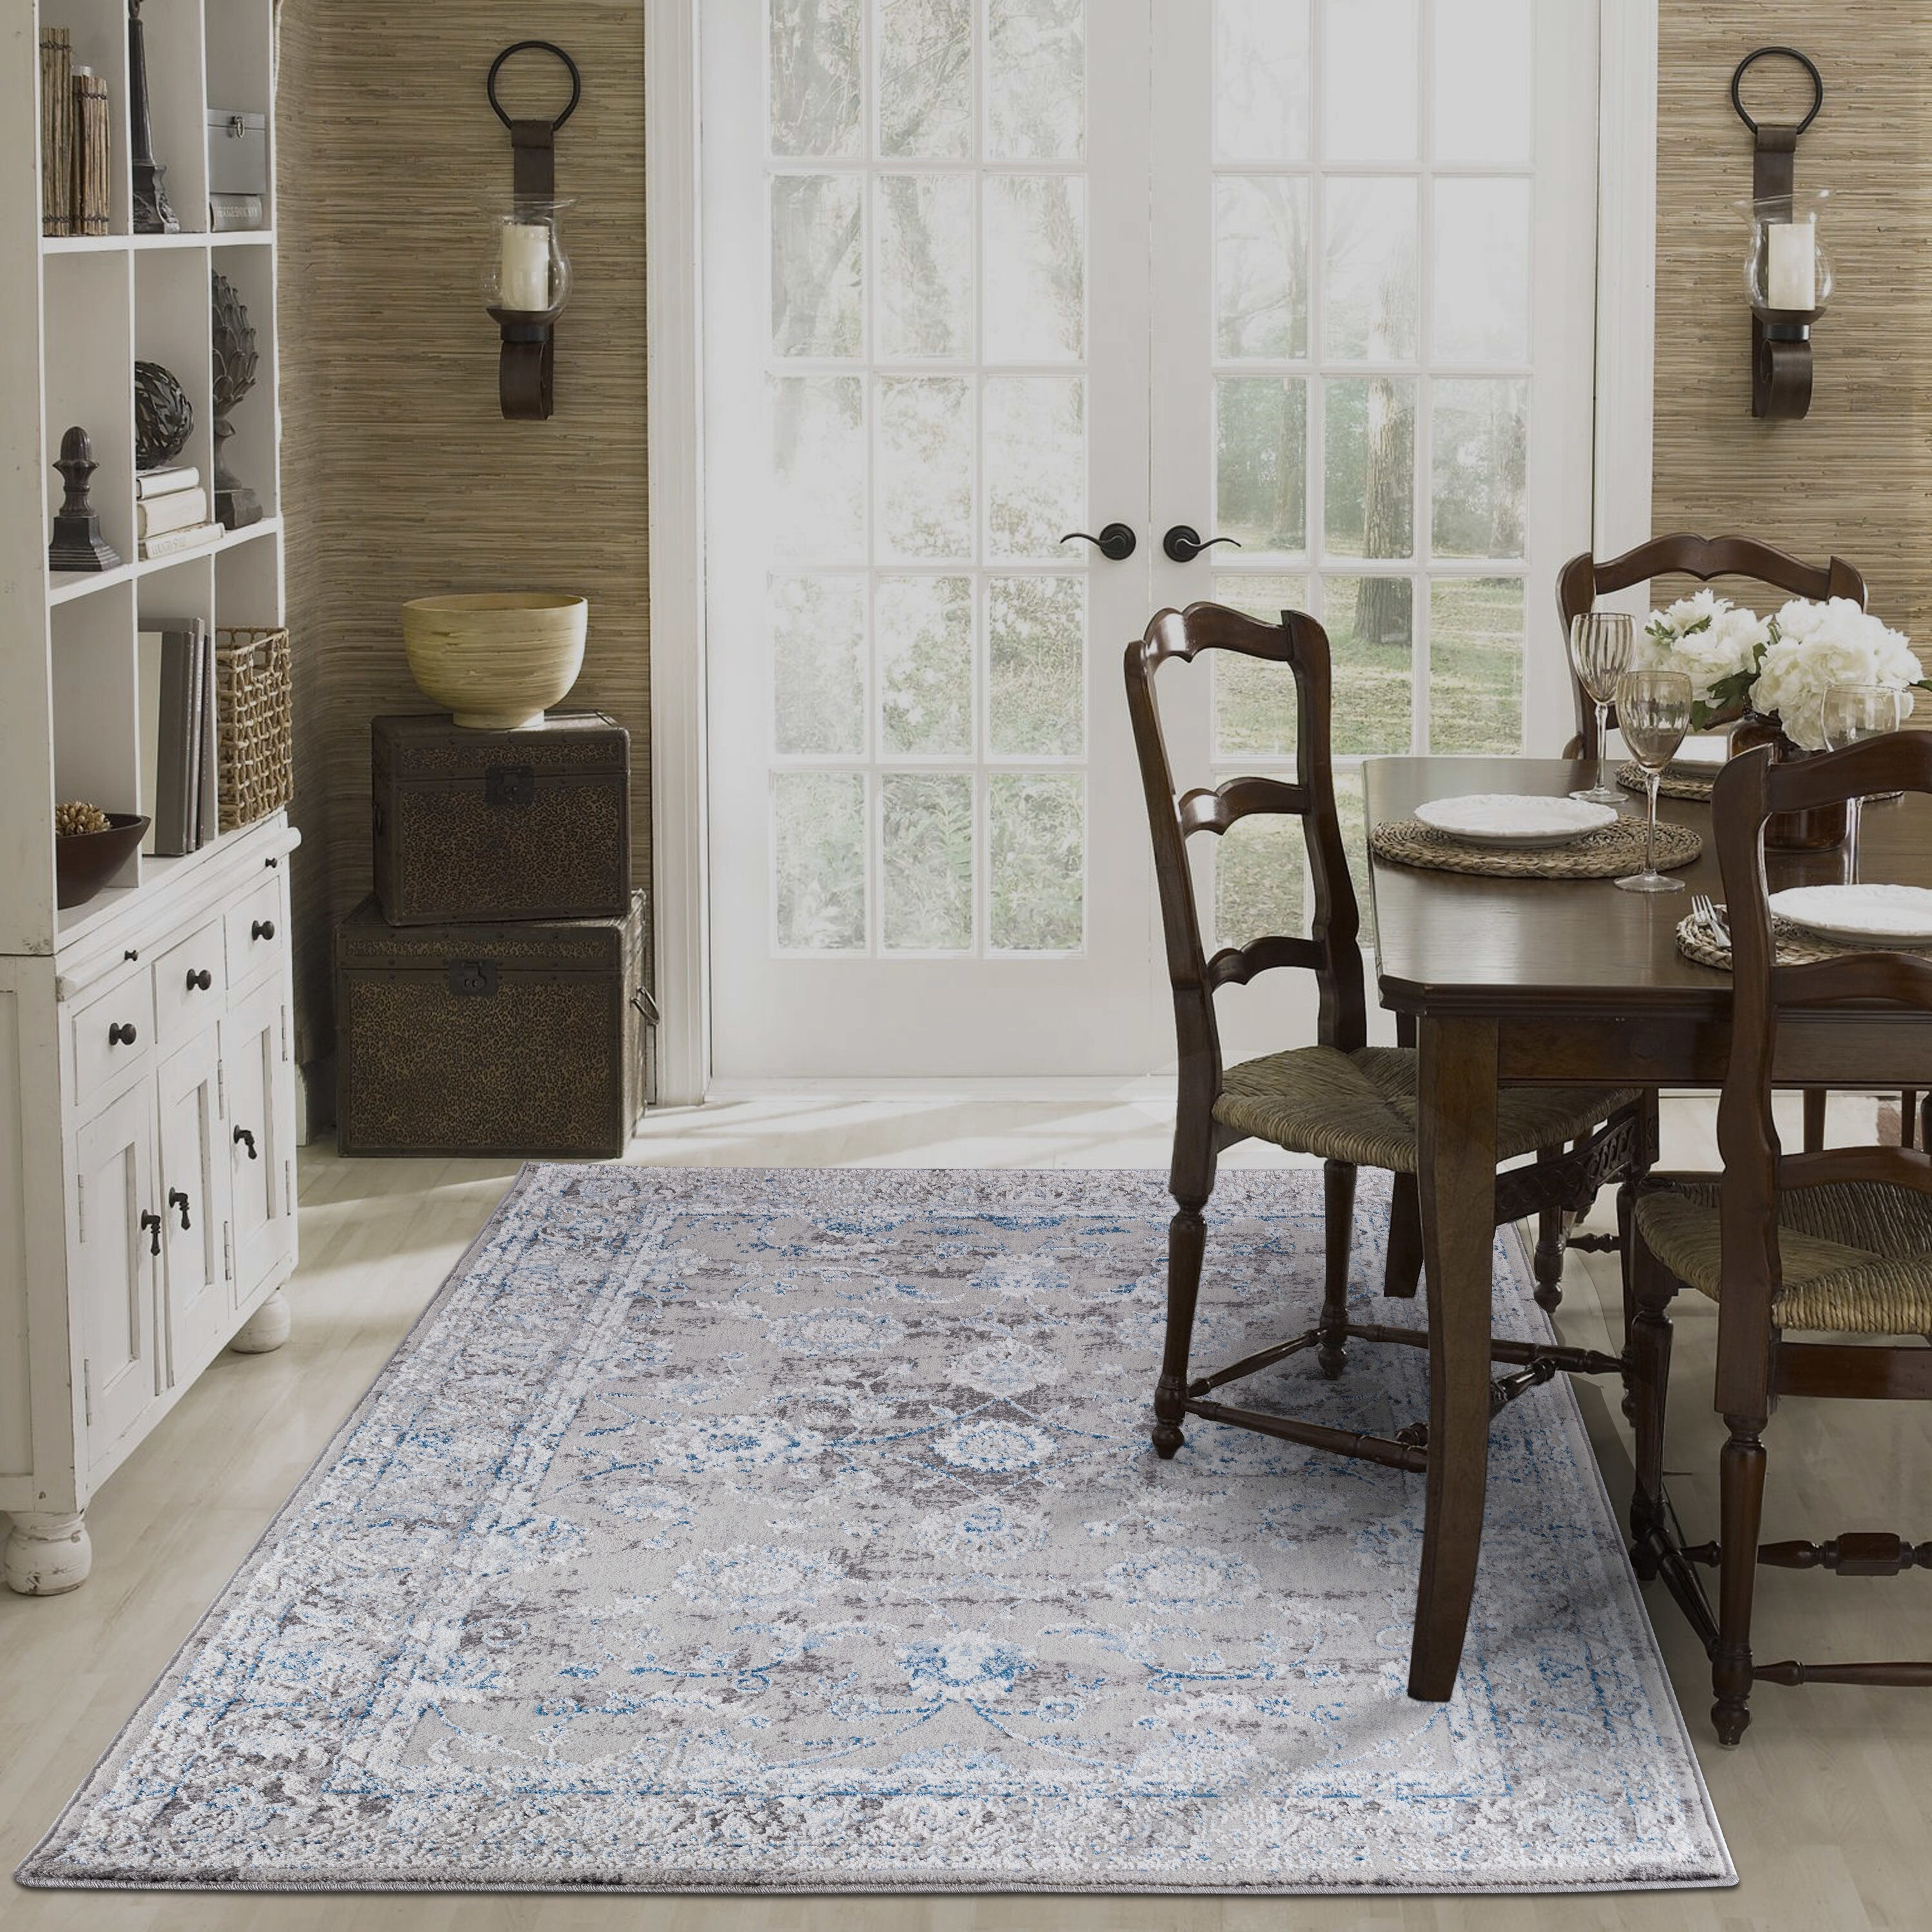 2' x 3' : Rugs for Your Home - Stylish & Affordable Area Rugs : Target